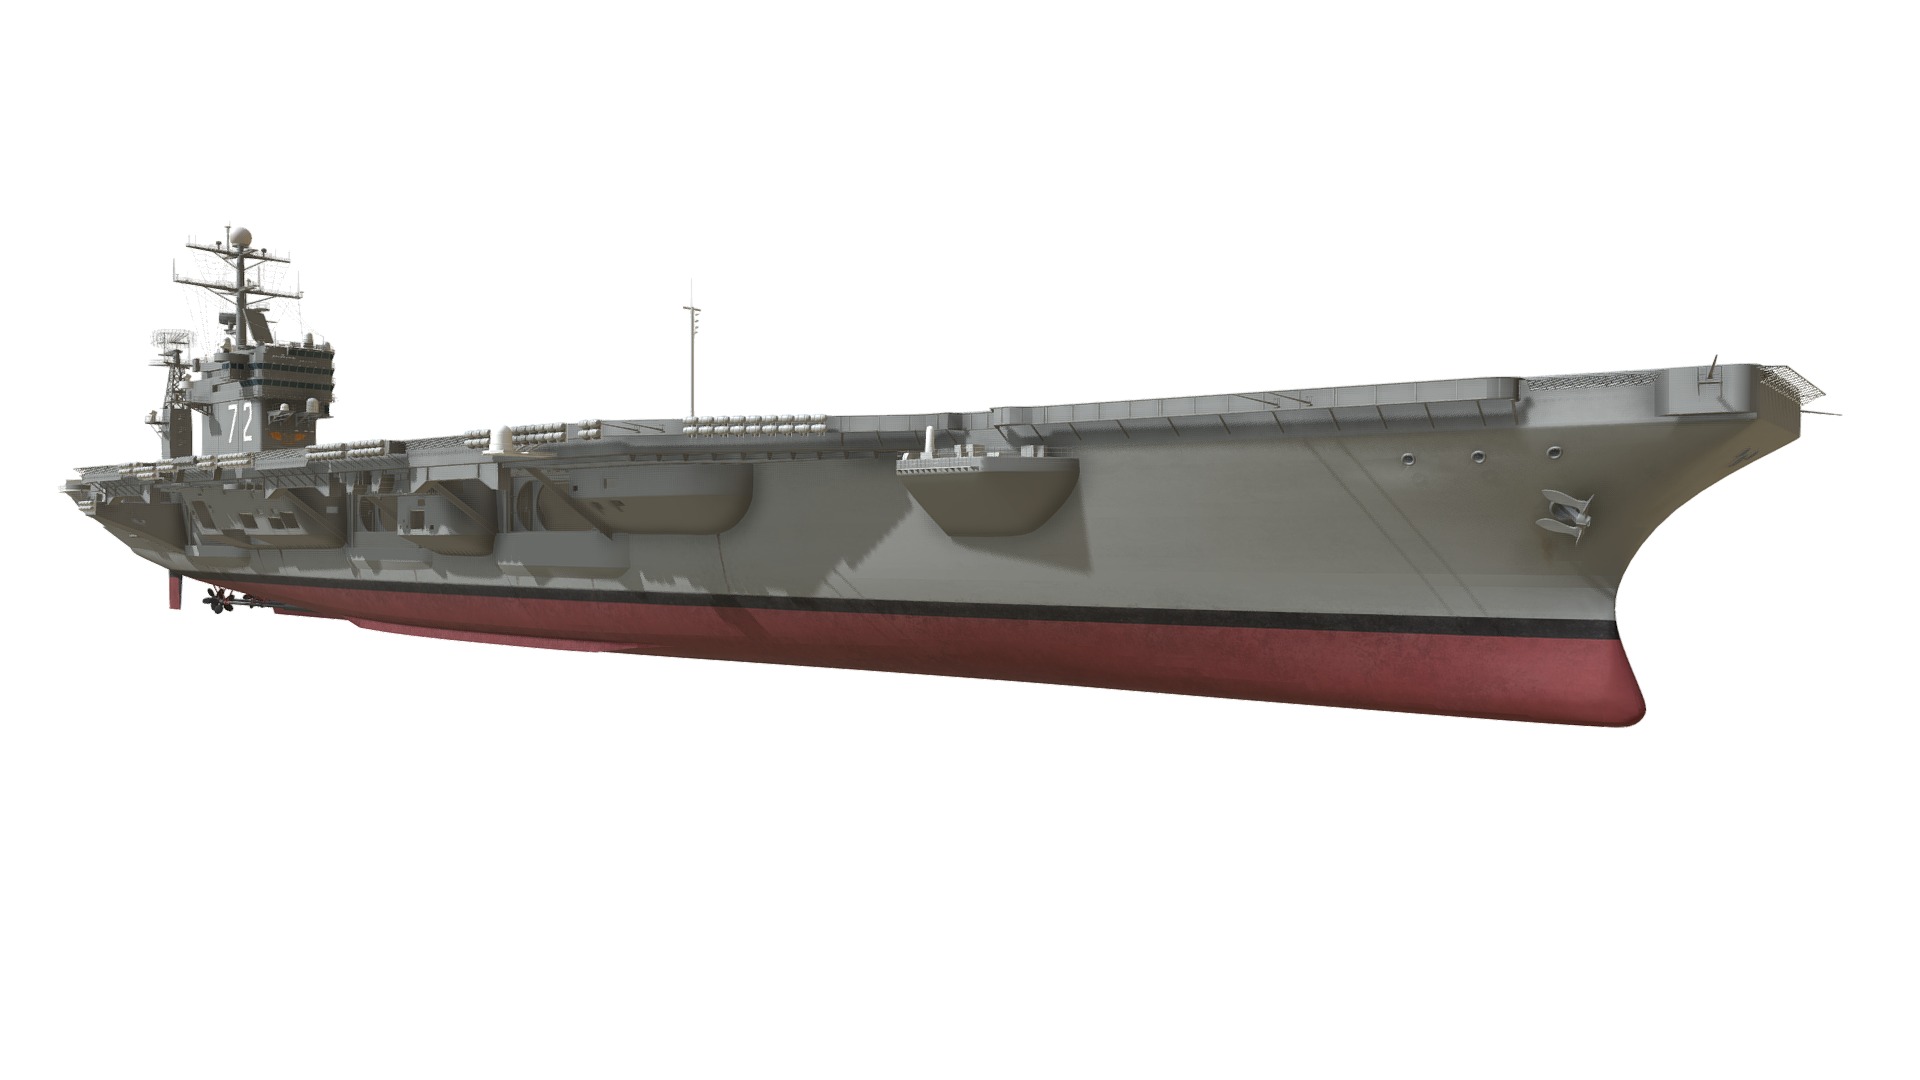 3D model USS Abraham Lincoln Aircraft Carrier CVN-72 - This is a 3D model of the USS Abraham Lincoln Aircraft Carrier CVN-72. The 3D model is about a large red and white ship.